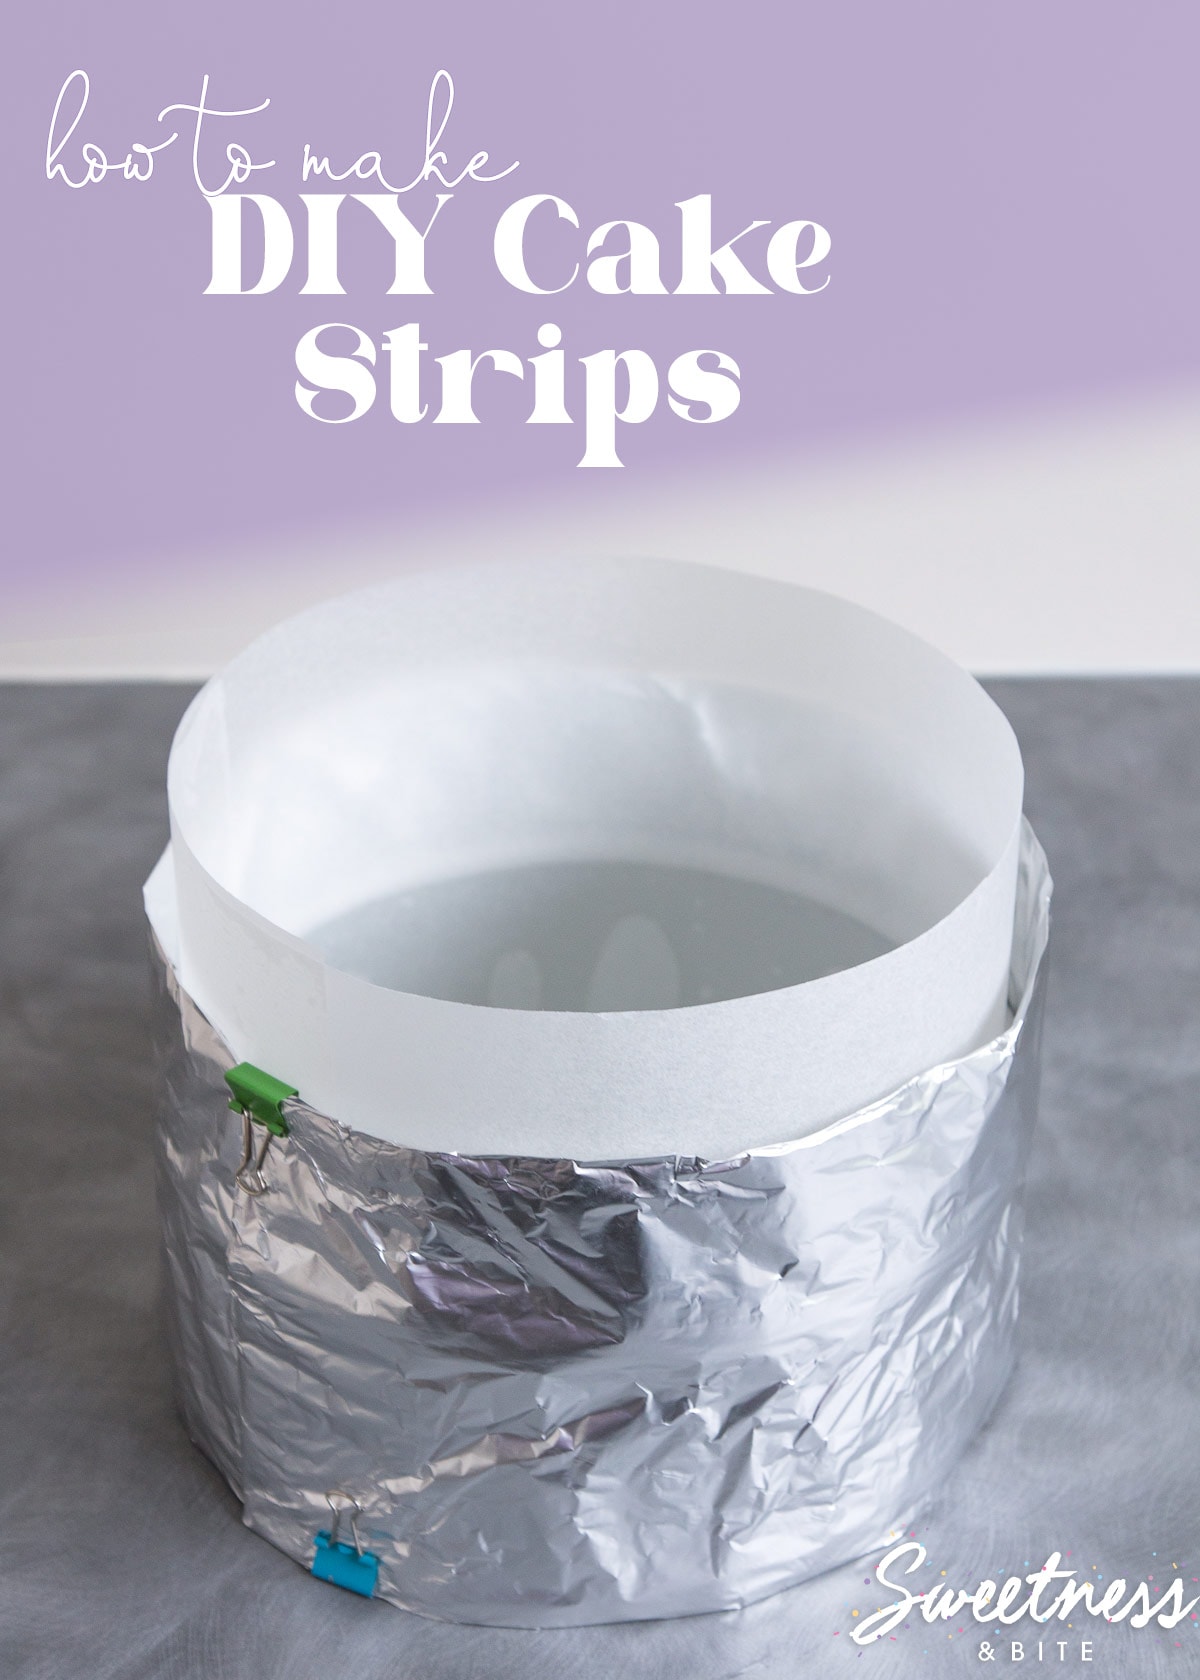 A round cake pan lined with baking paper and wrapped with a foil diy cake strip.